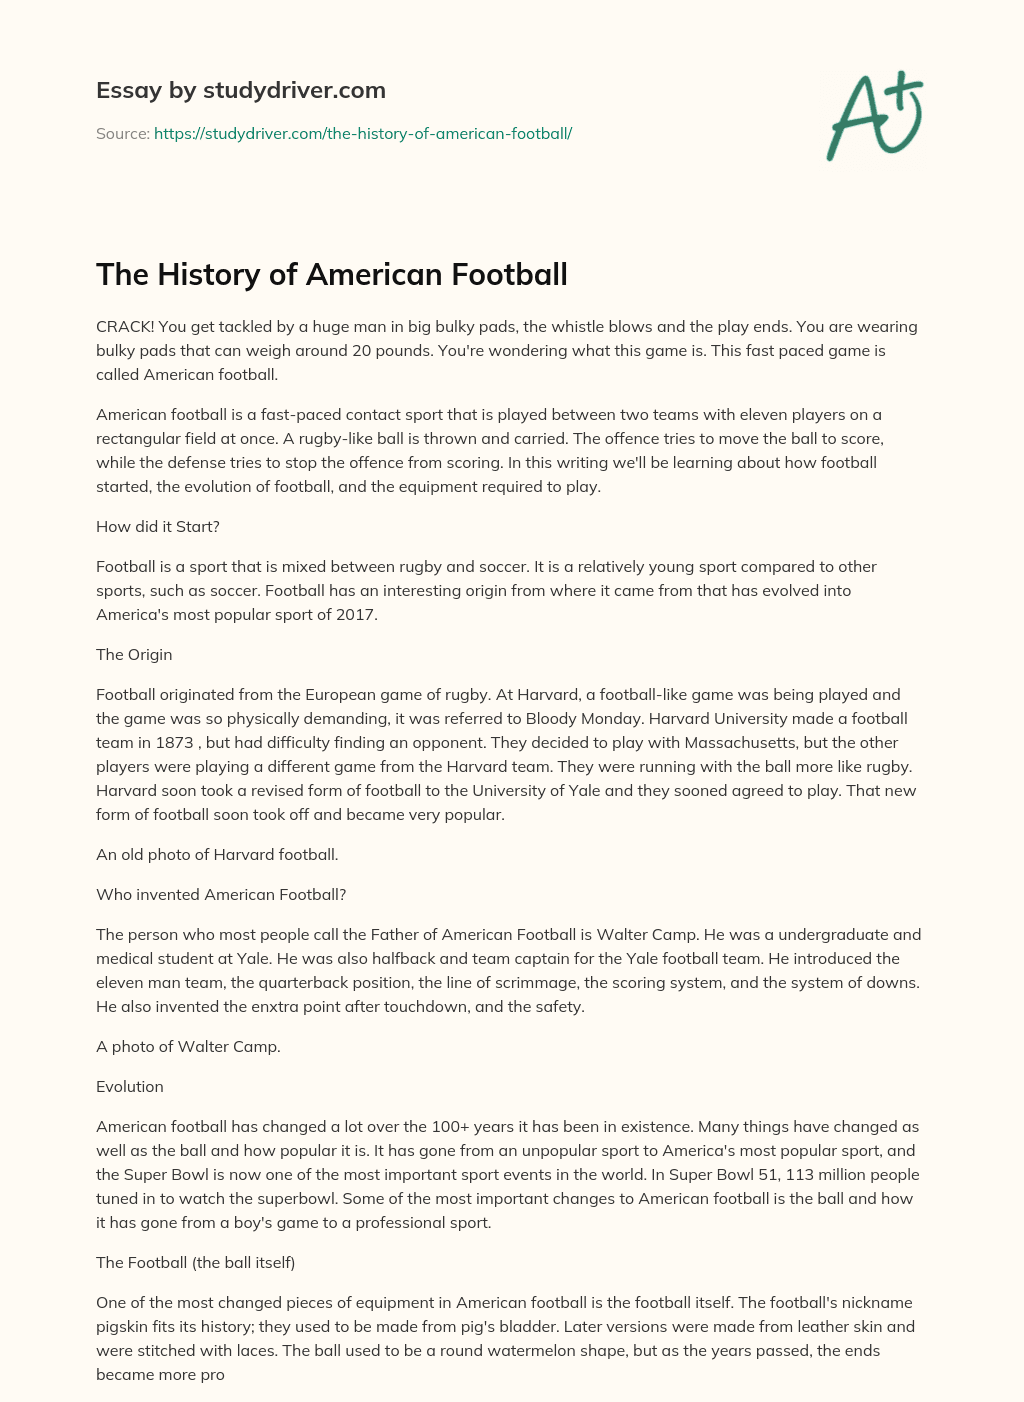 The History of American Football - Free Essay Example | StudyDriver.com